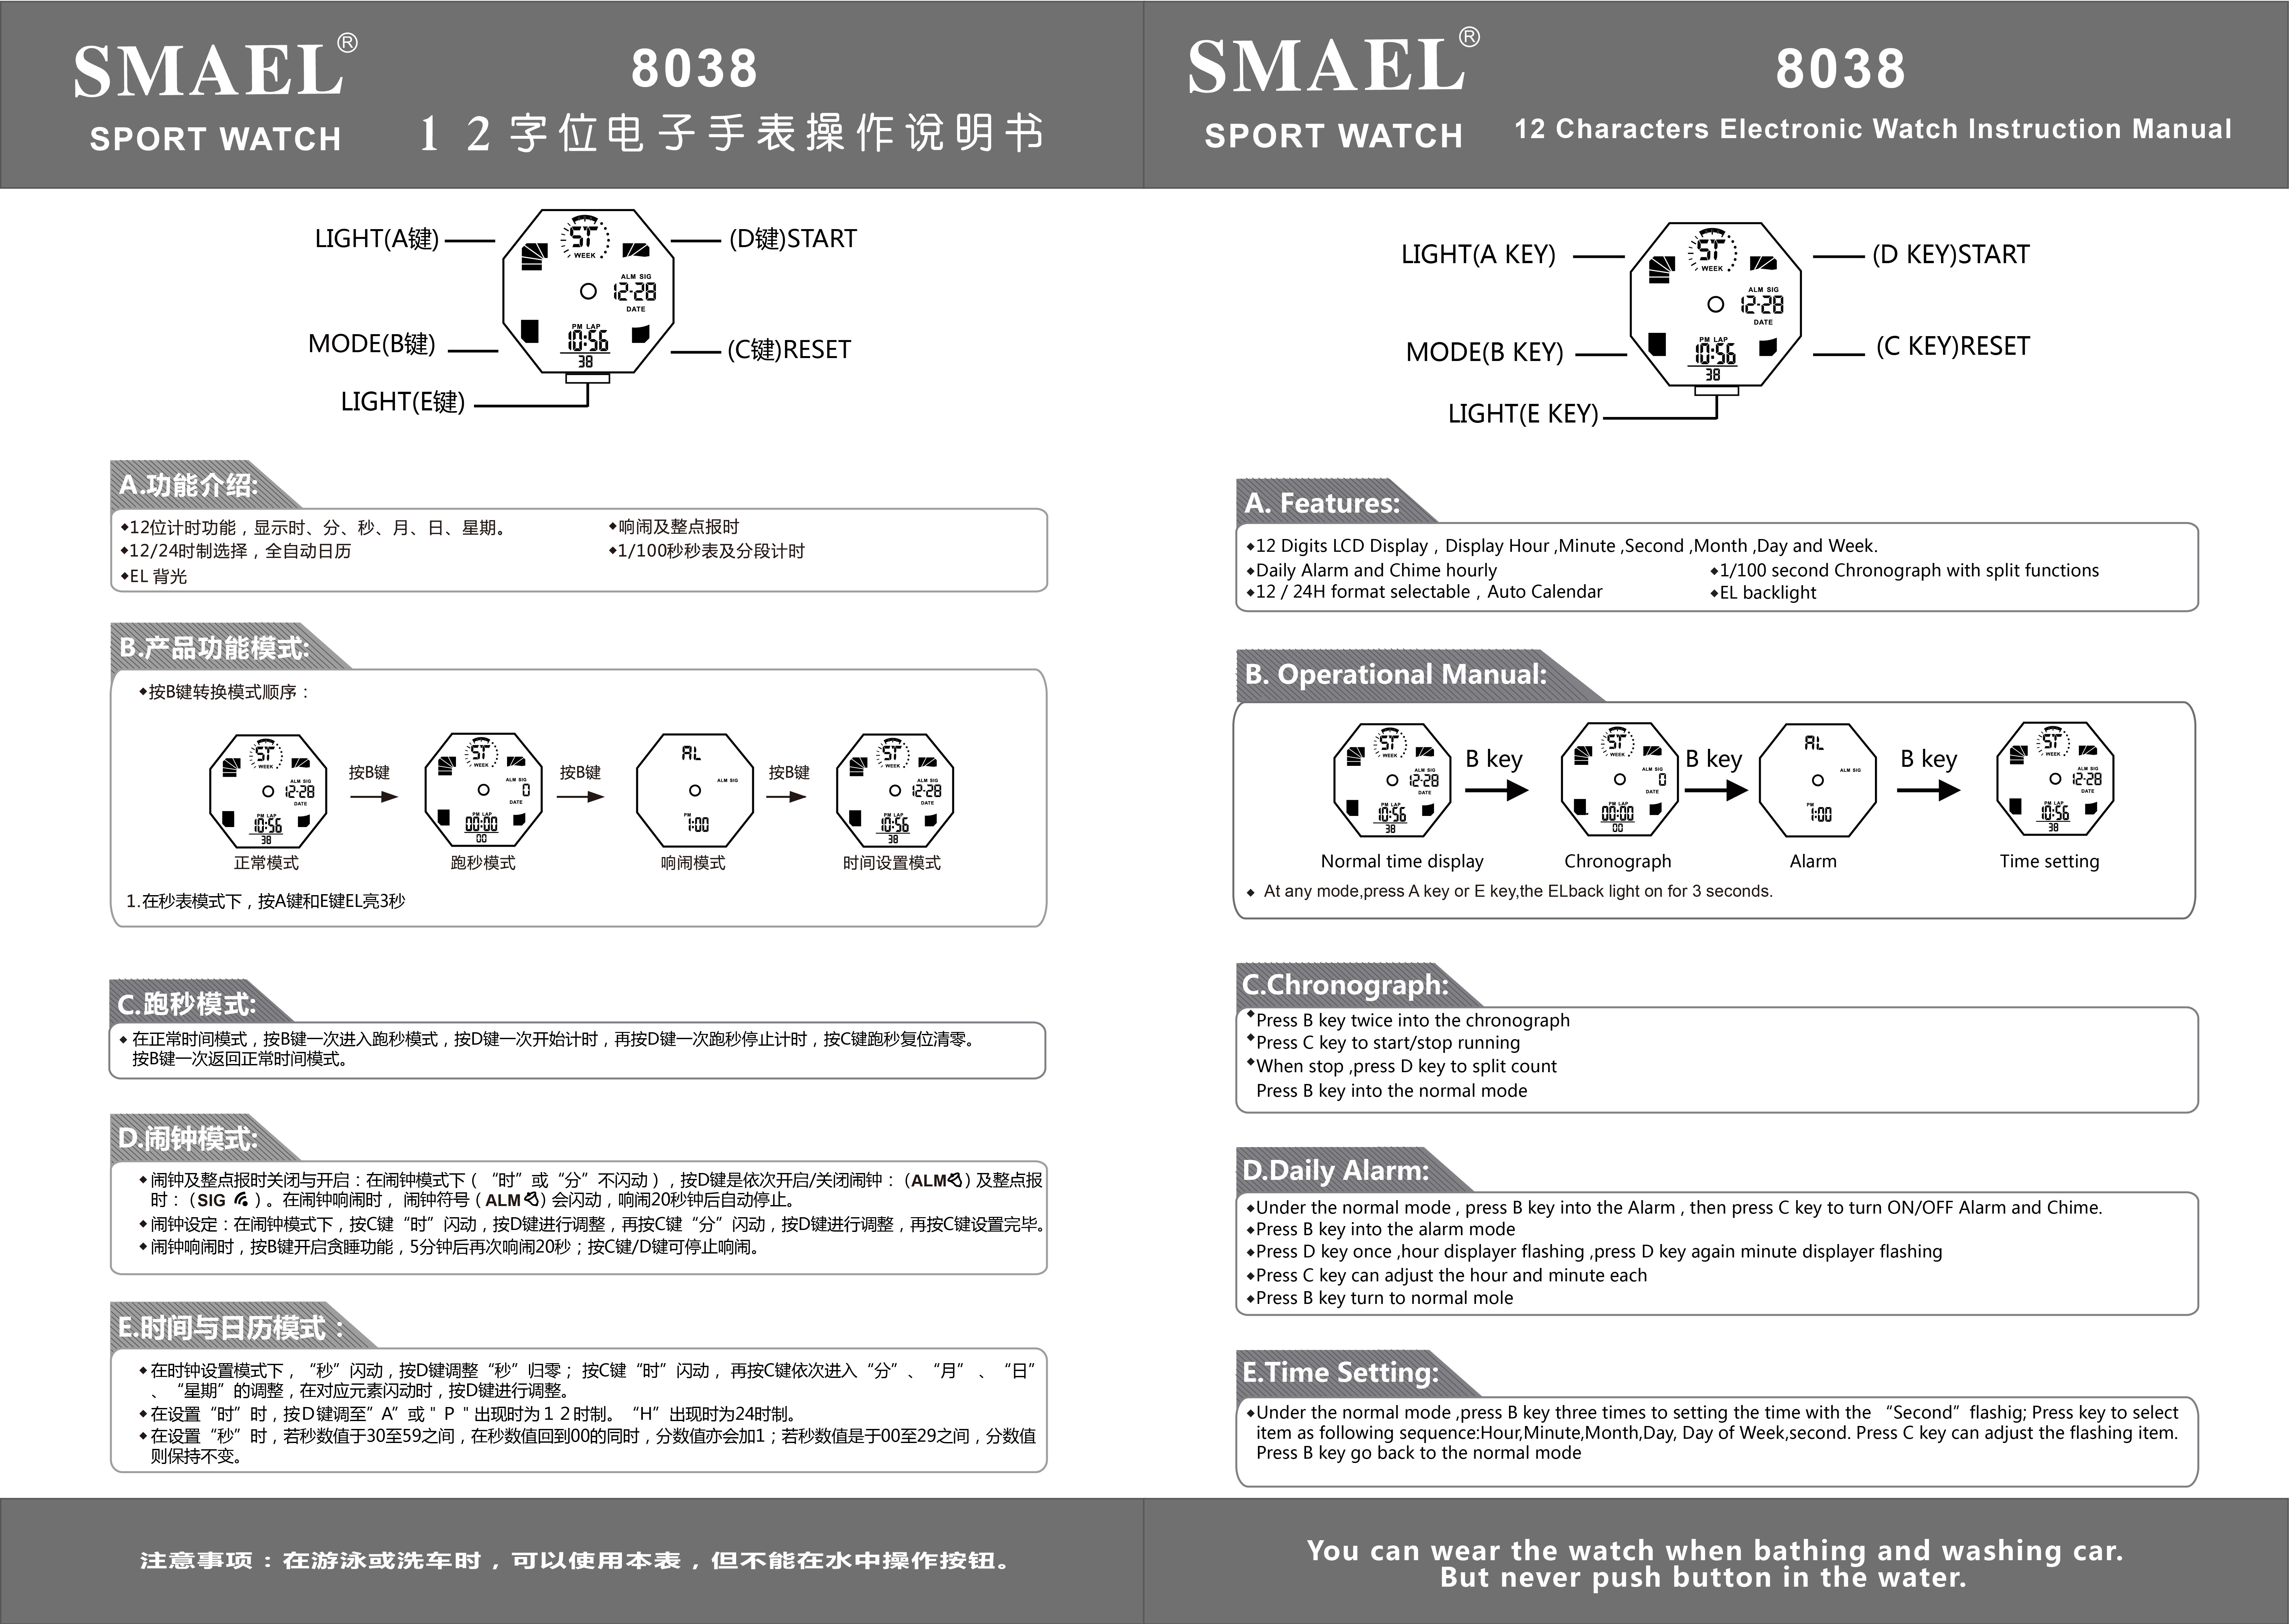 8038 instructions in English and Chinese 12